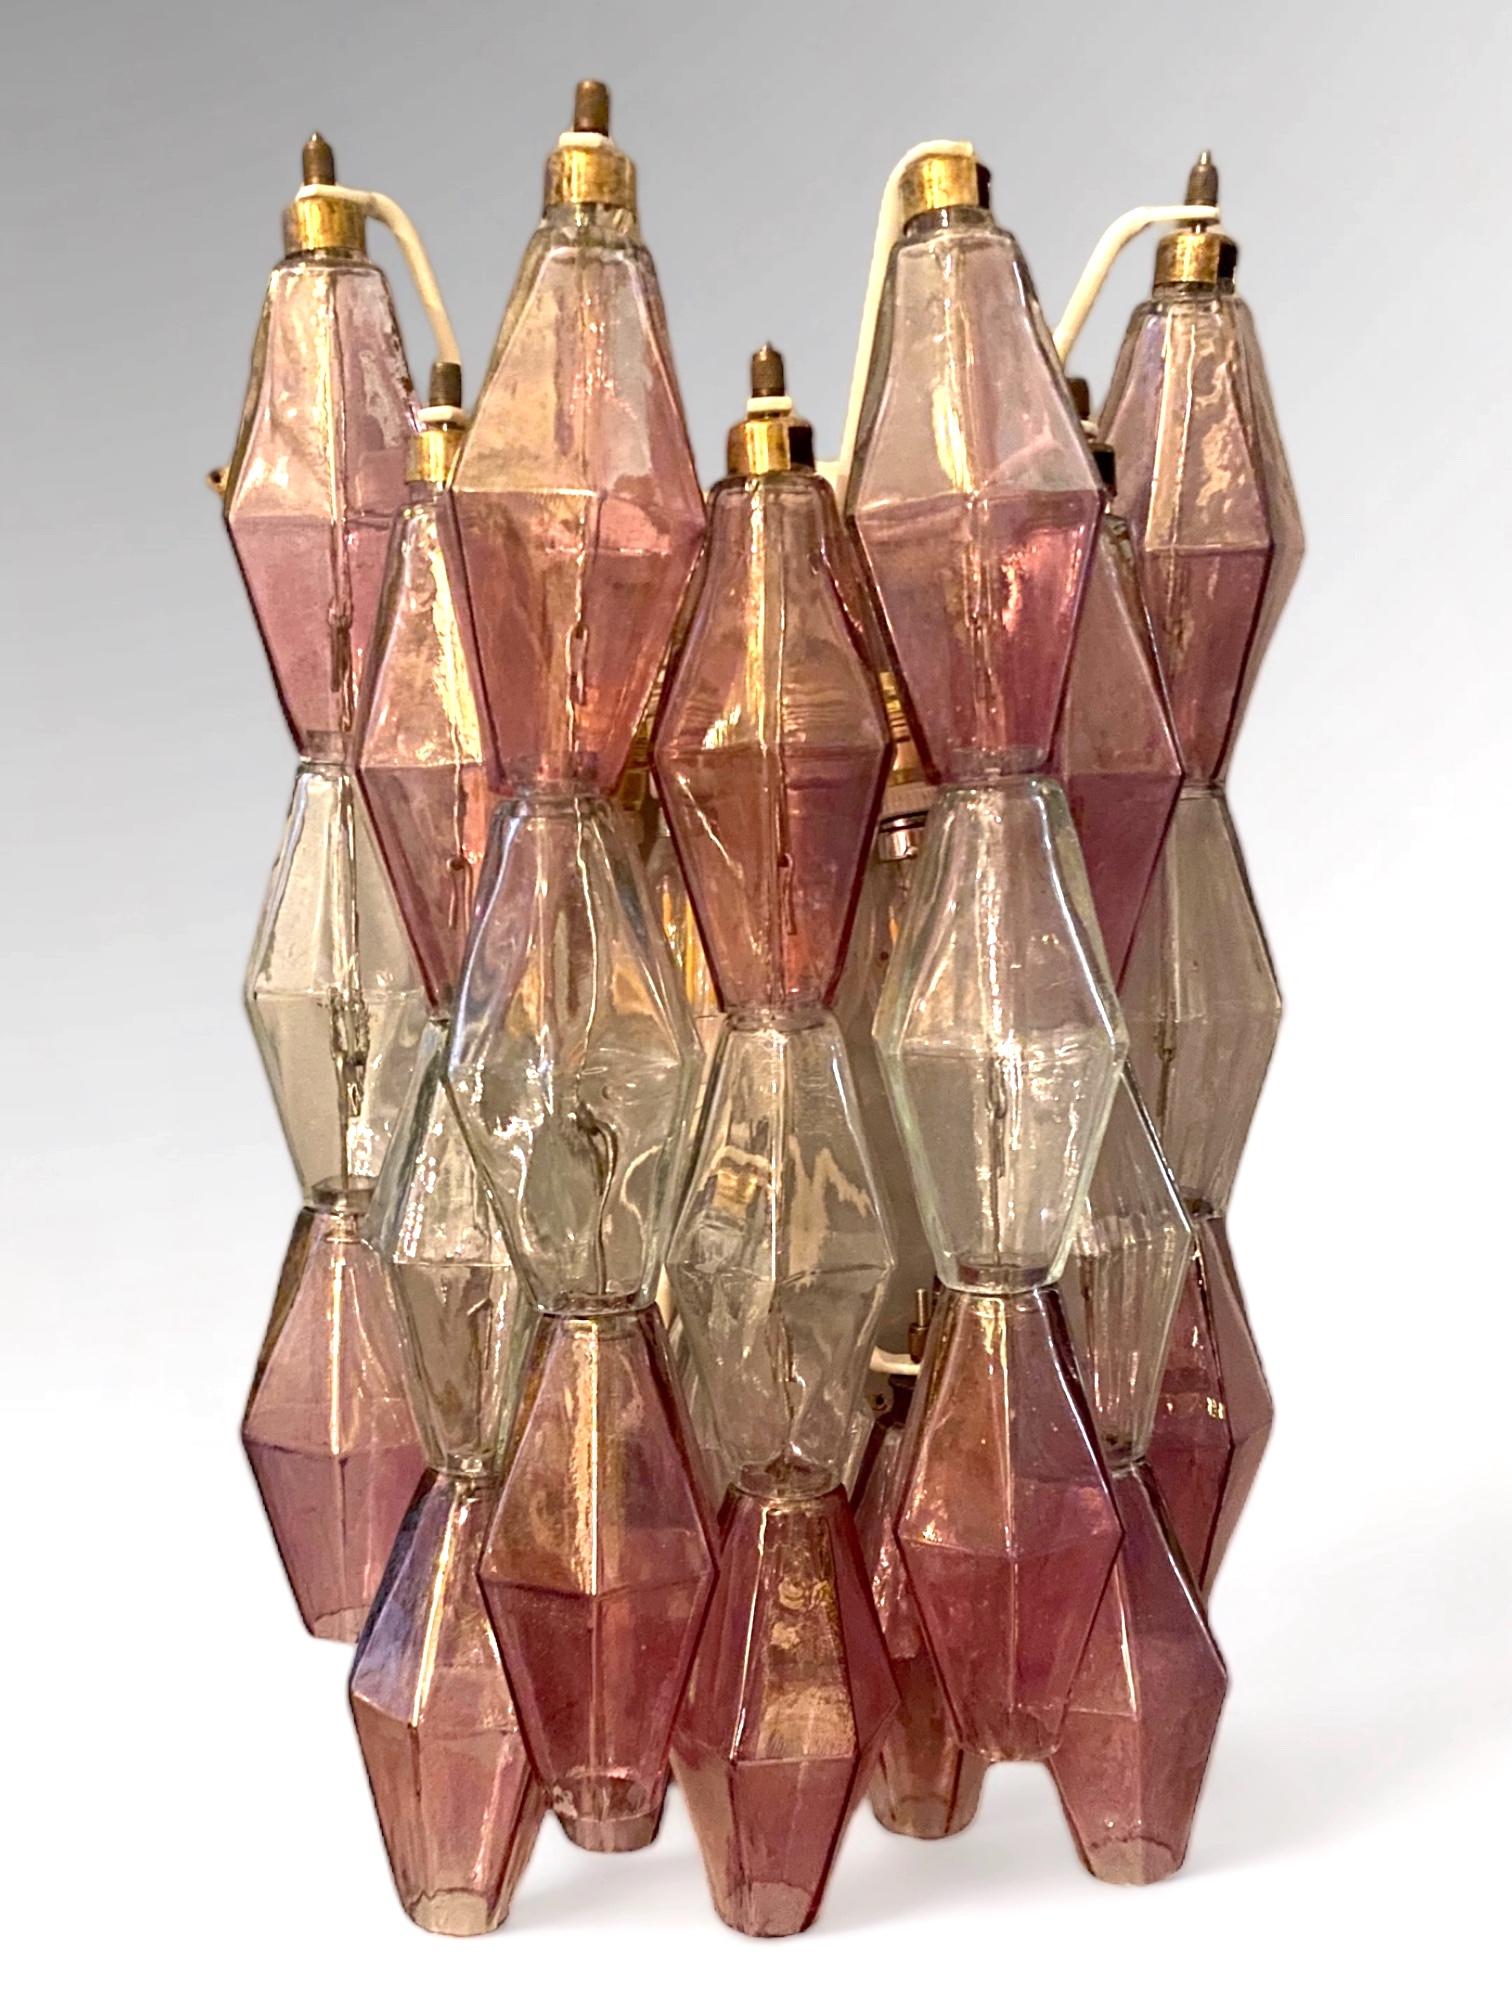 Amazing pair of poliedri wall lights. Rare combination of iridescent pink amethyst  and clear color Murano glass.
Available four pairs and also a chandelier.
Provenance form a historic Roman Palace of the period.
 
Cleaned and re-wired, in full